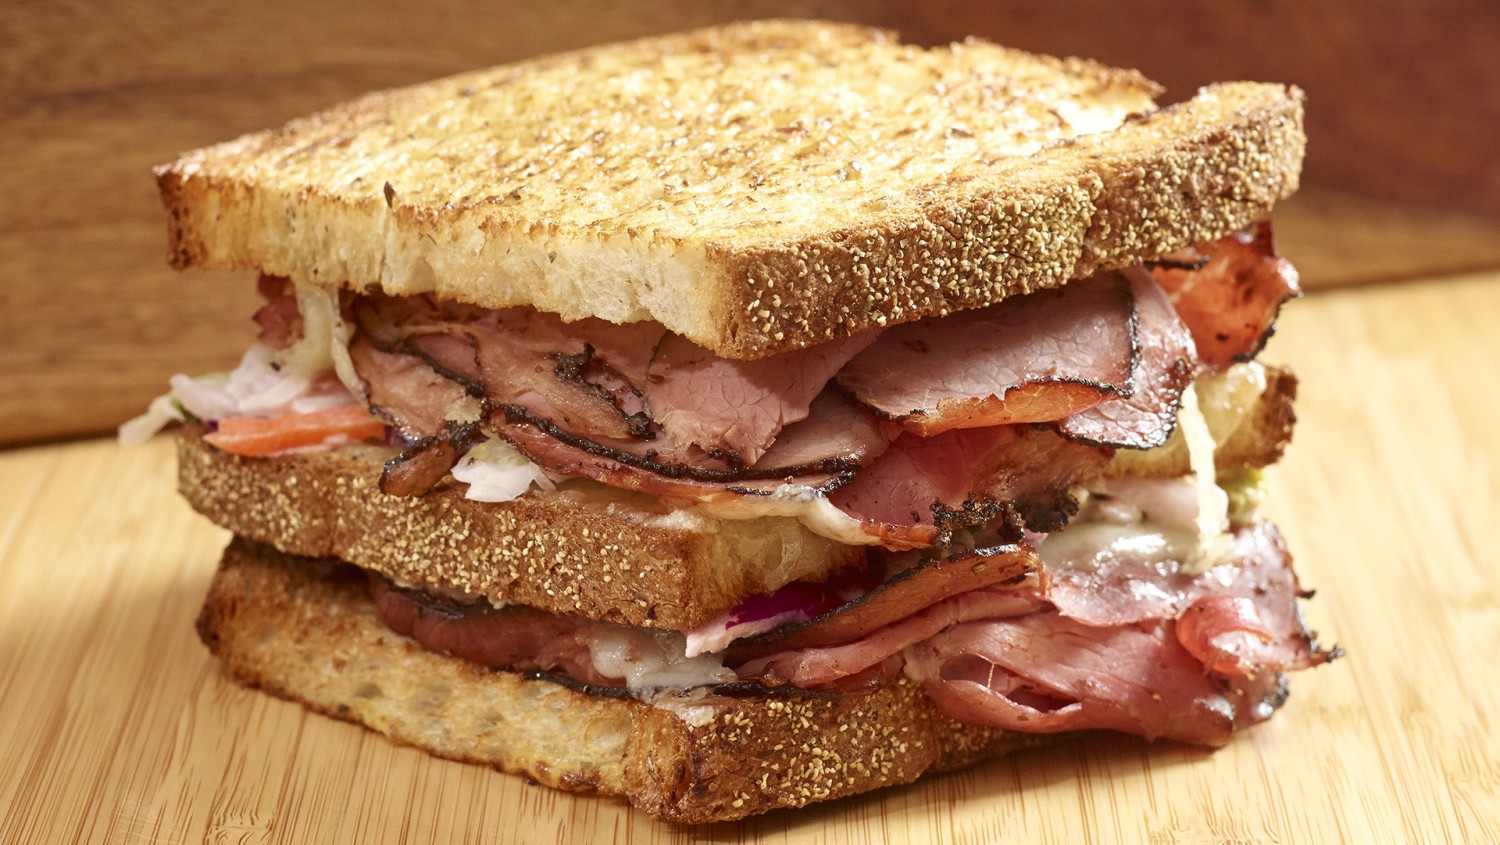 Amway Grand_The Kitchen Counter by Wolfgang Puck_Sandwich_Pastrami_Cheese_Sourdough Bread